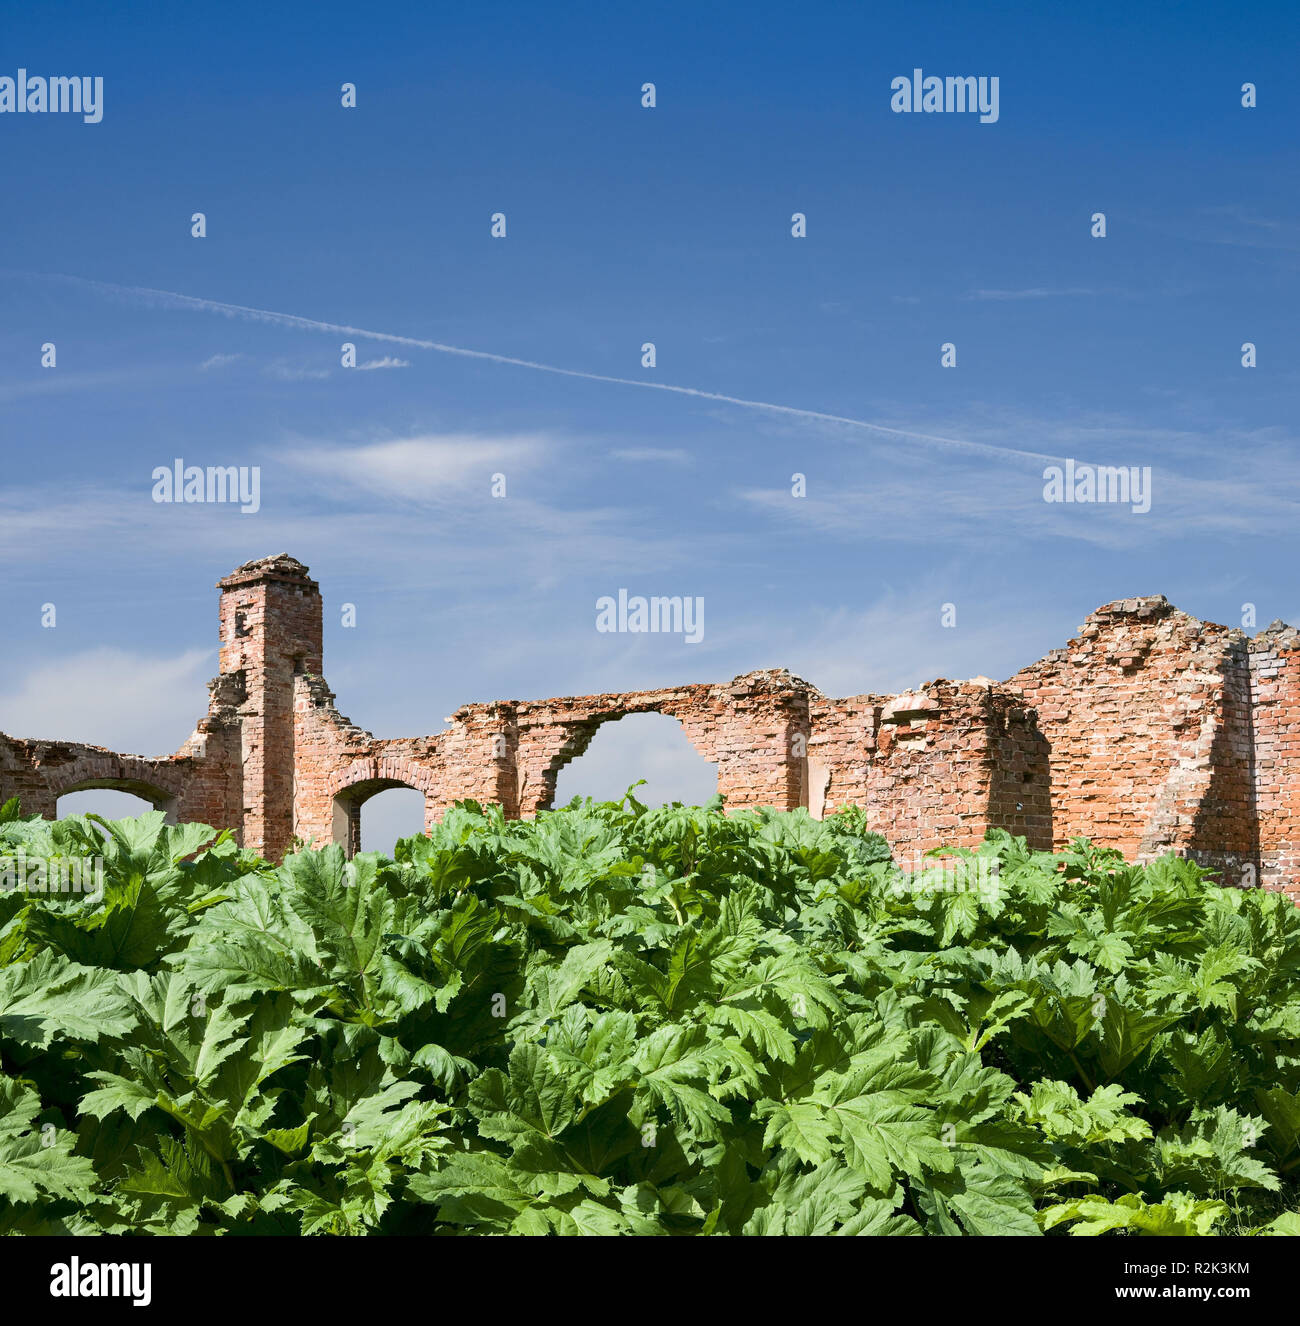 Lithuania, leaves in front of a ruin, Composing, Stock Photo